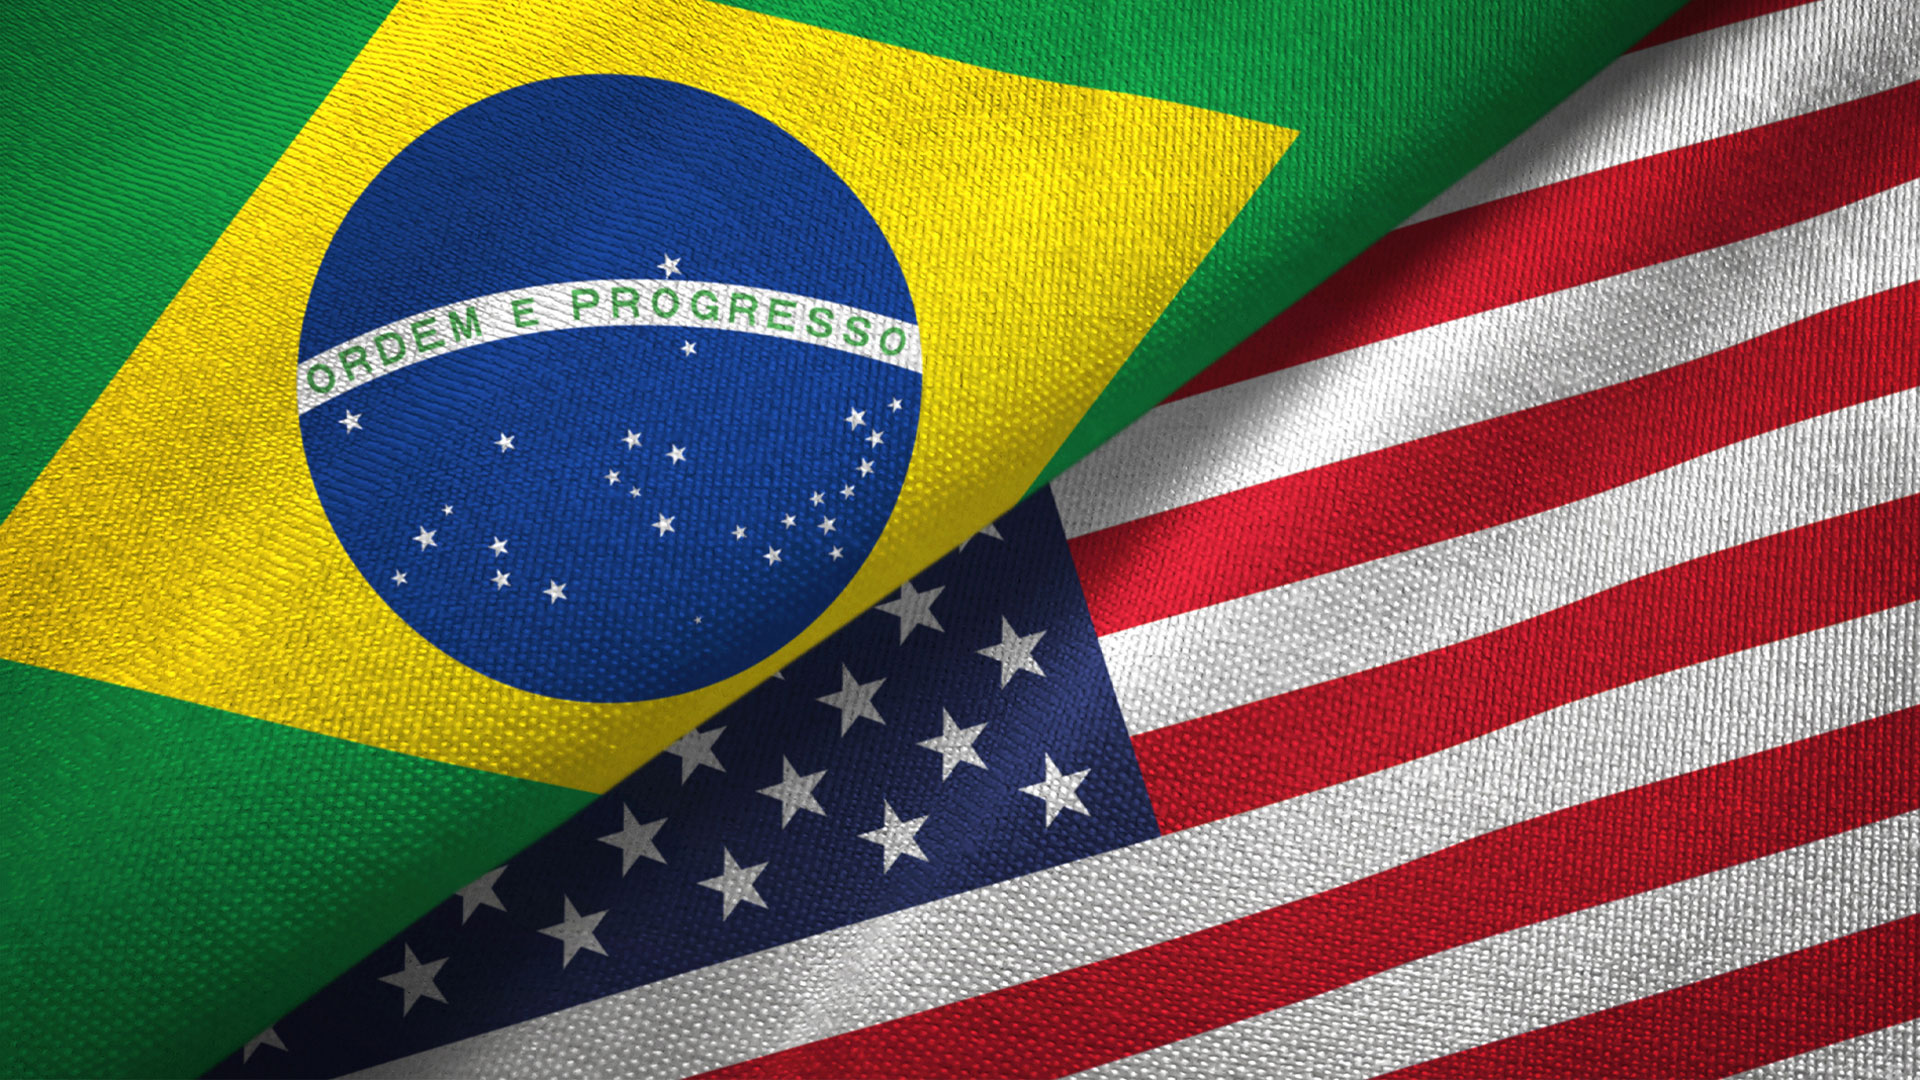 United States and Brazil two flags textile cloth fabric texture image